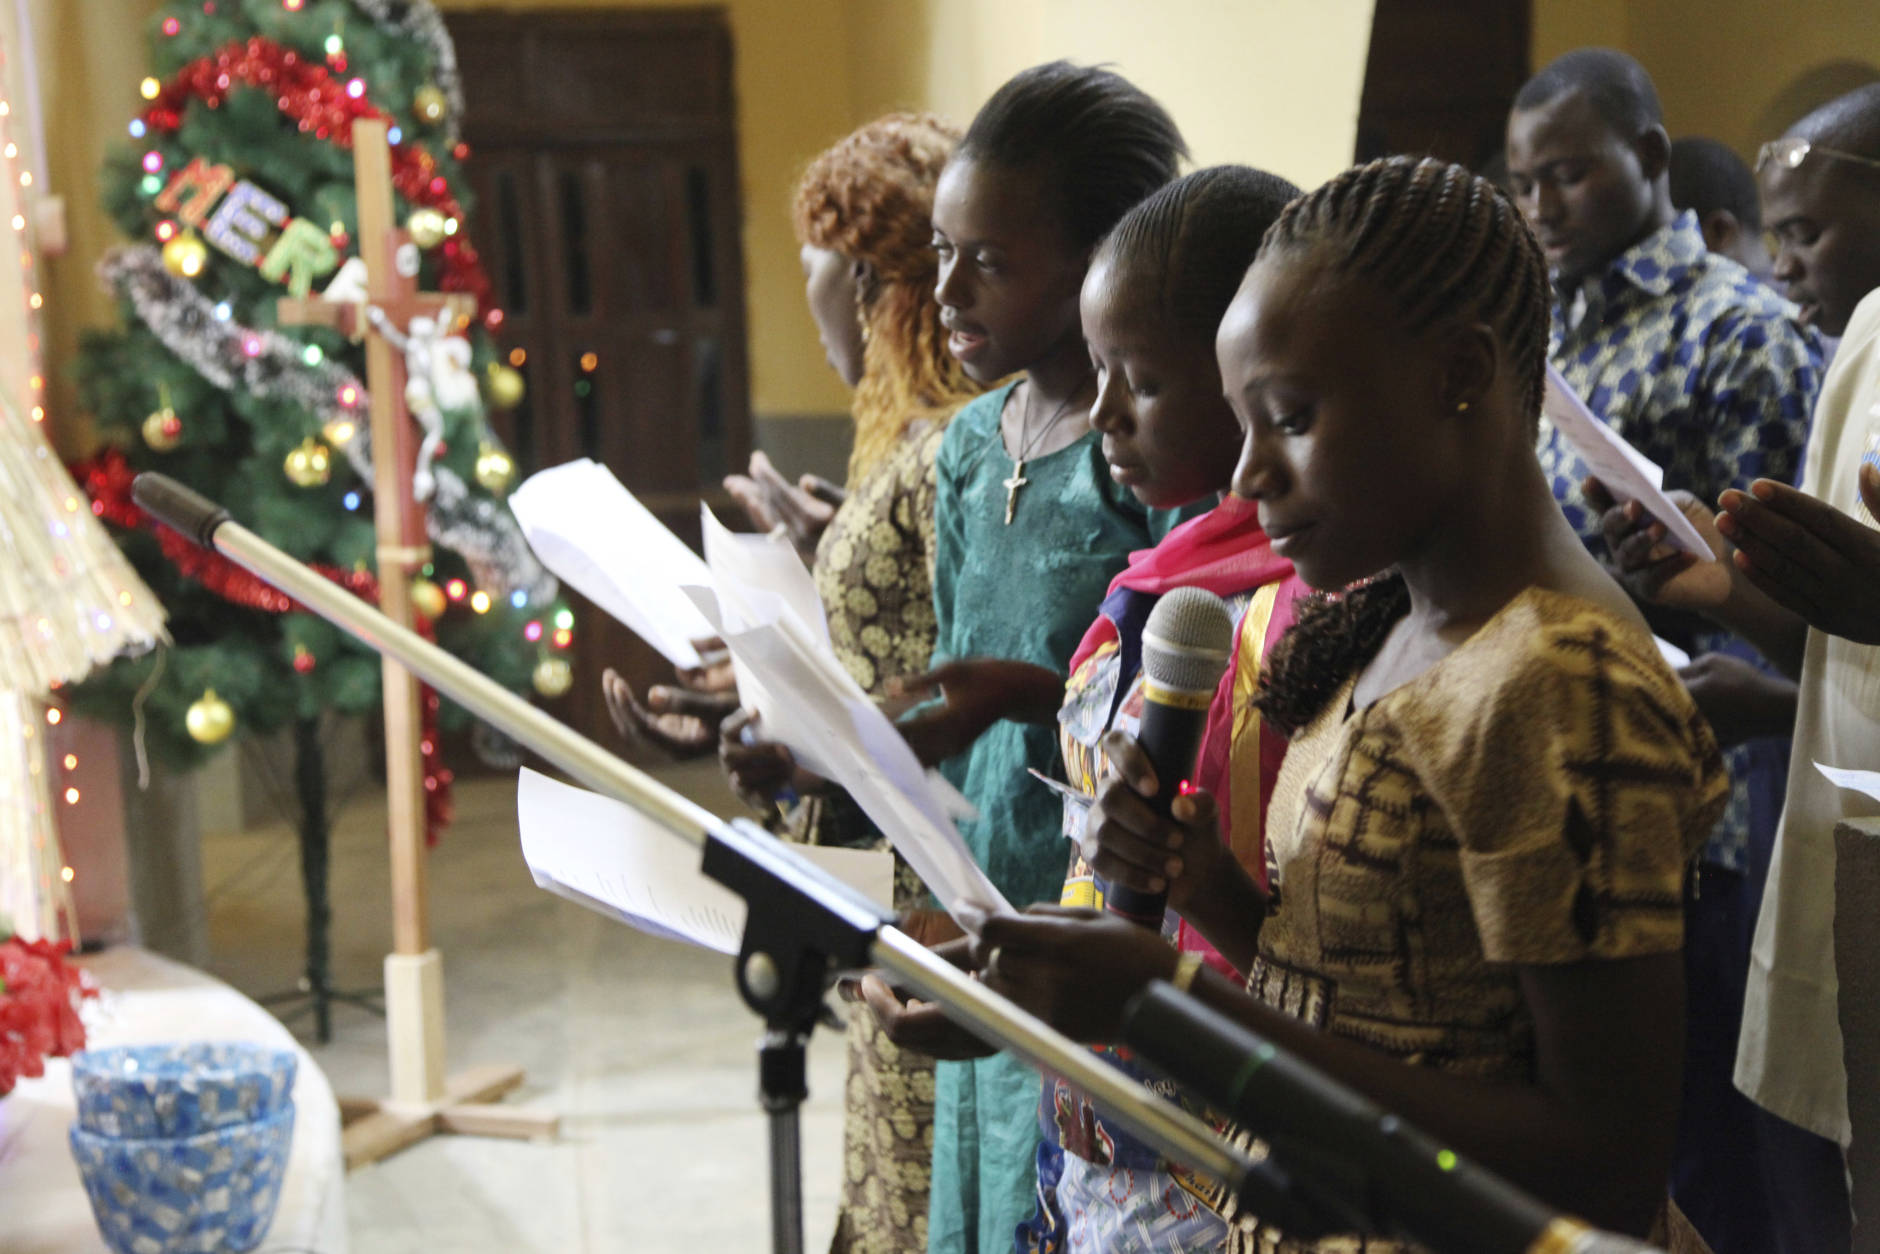 In this photo taken Saturday, Dec. 24, 2016, Catholic faithfuls sing during a mass to celebrate Christmas at Philippe Amore Catholic Church in Goa, Mali. Just four years ago strict Islamic law was in force in this town, but Christians have returned to rebuild their congregation that fled the jihadist occupation. (AP Photo/Baba Ahmed)